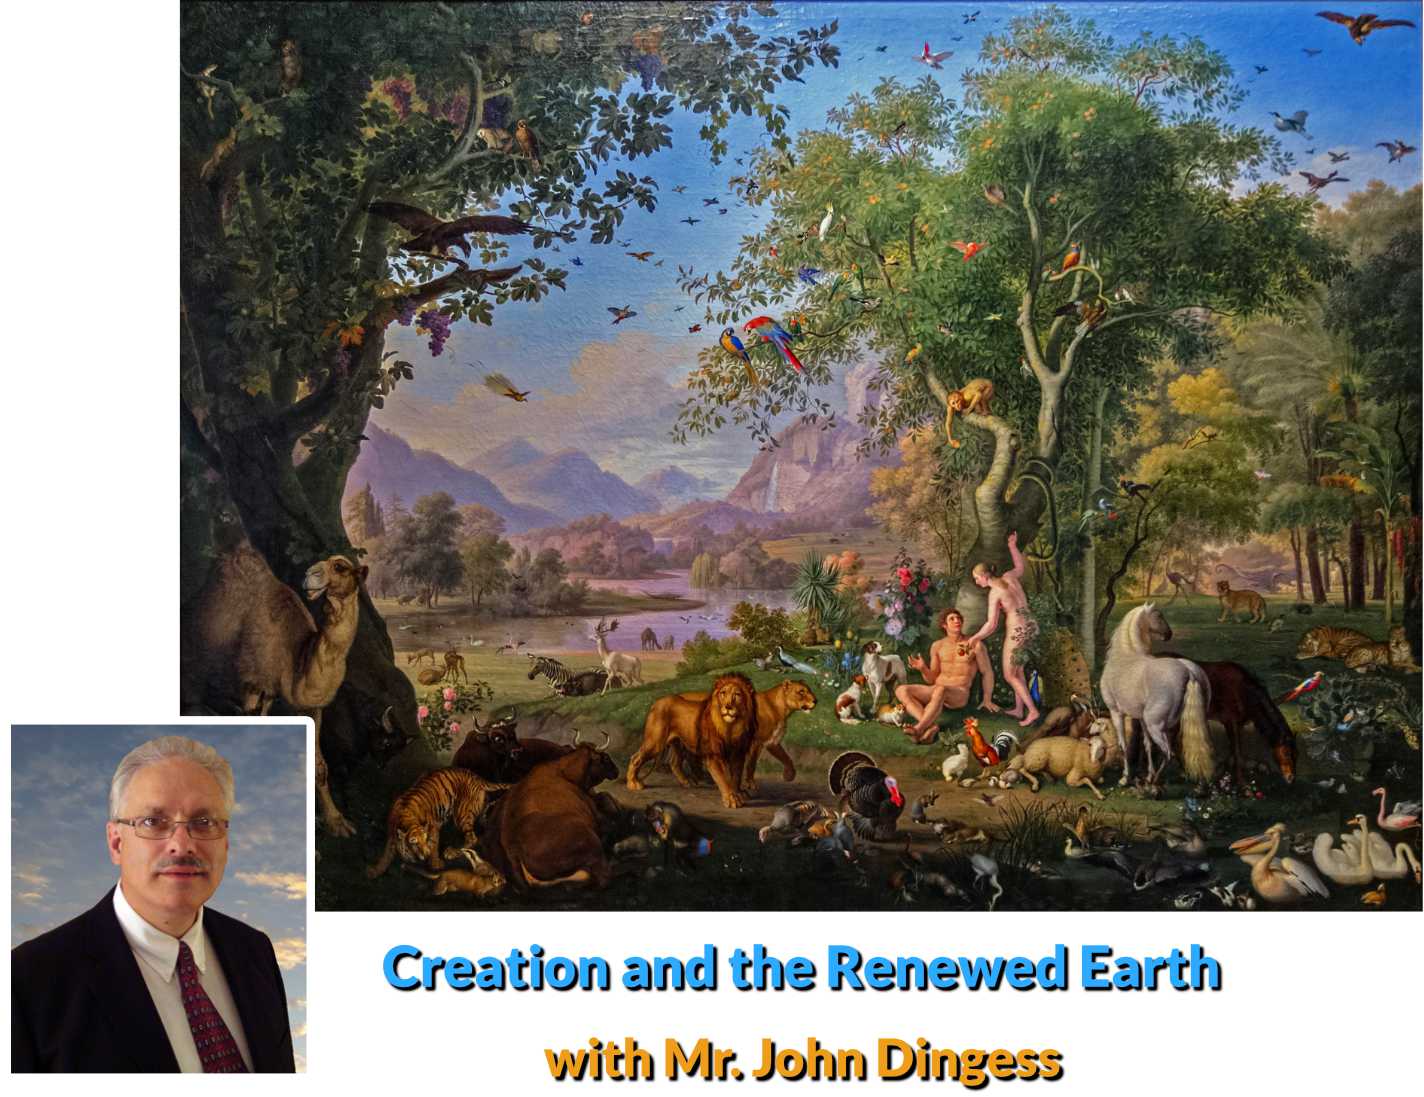  Presentation: Creation and a Renewed Earth, with John Dingess. Click for his bio.